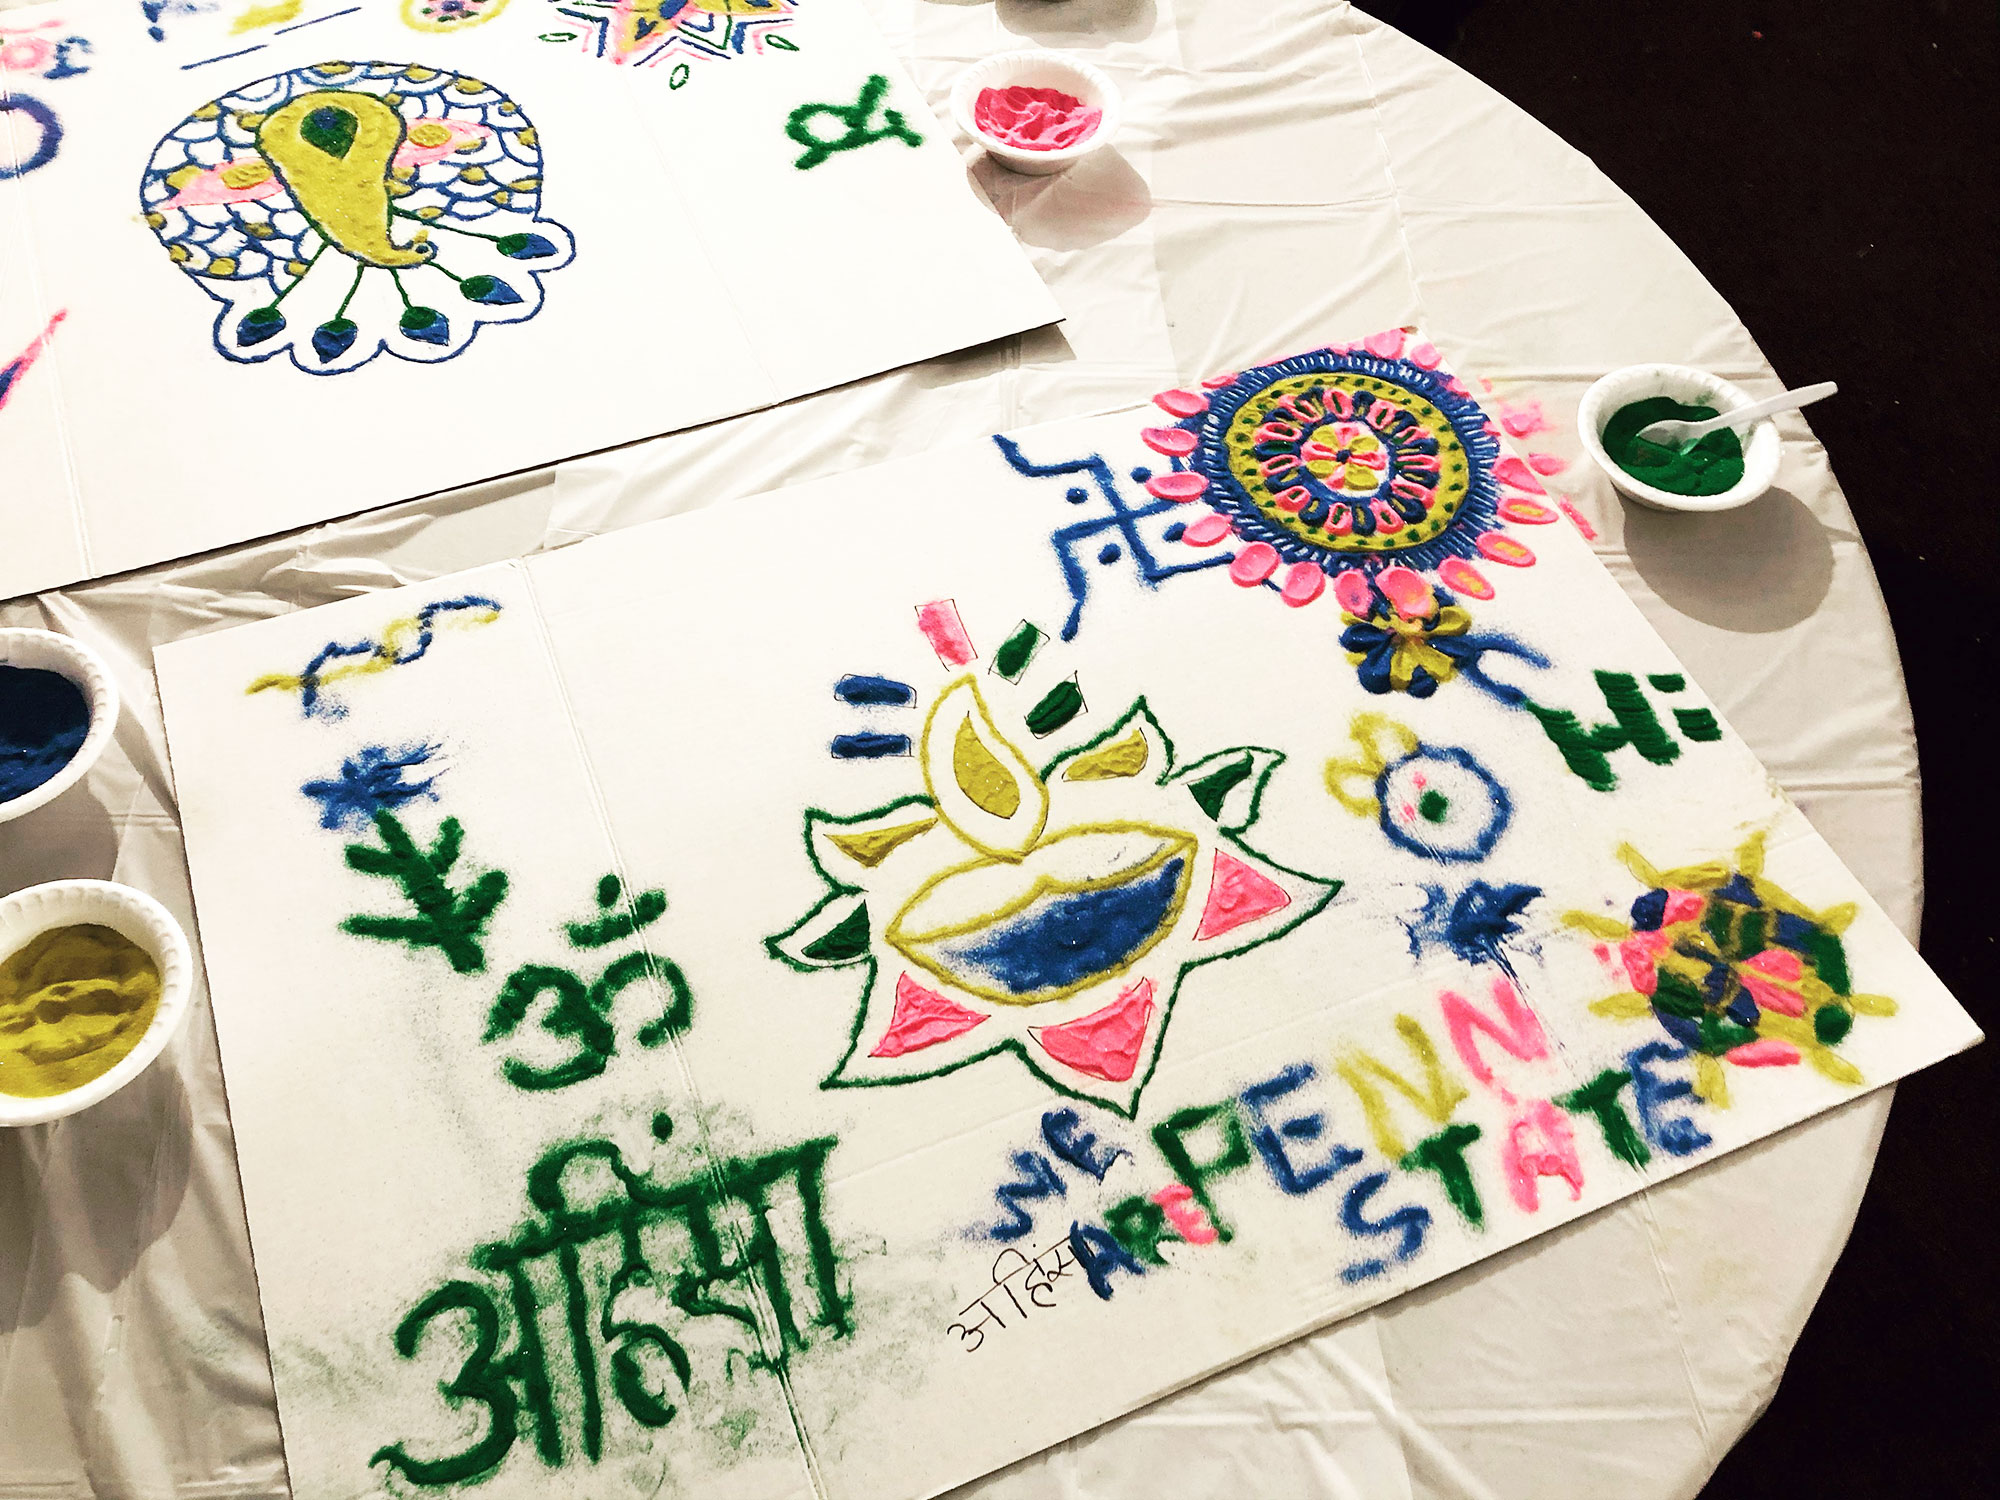 A piece of paper is covered in brightly colored drawings depicting flowers and geometric patterns, as well as the words We Are Penn State and writing in another language.